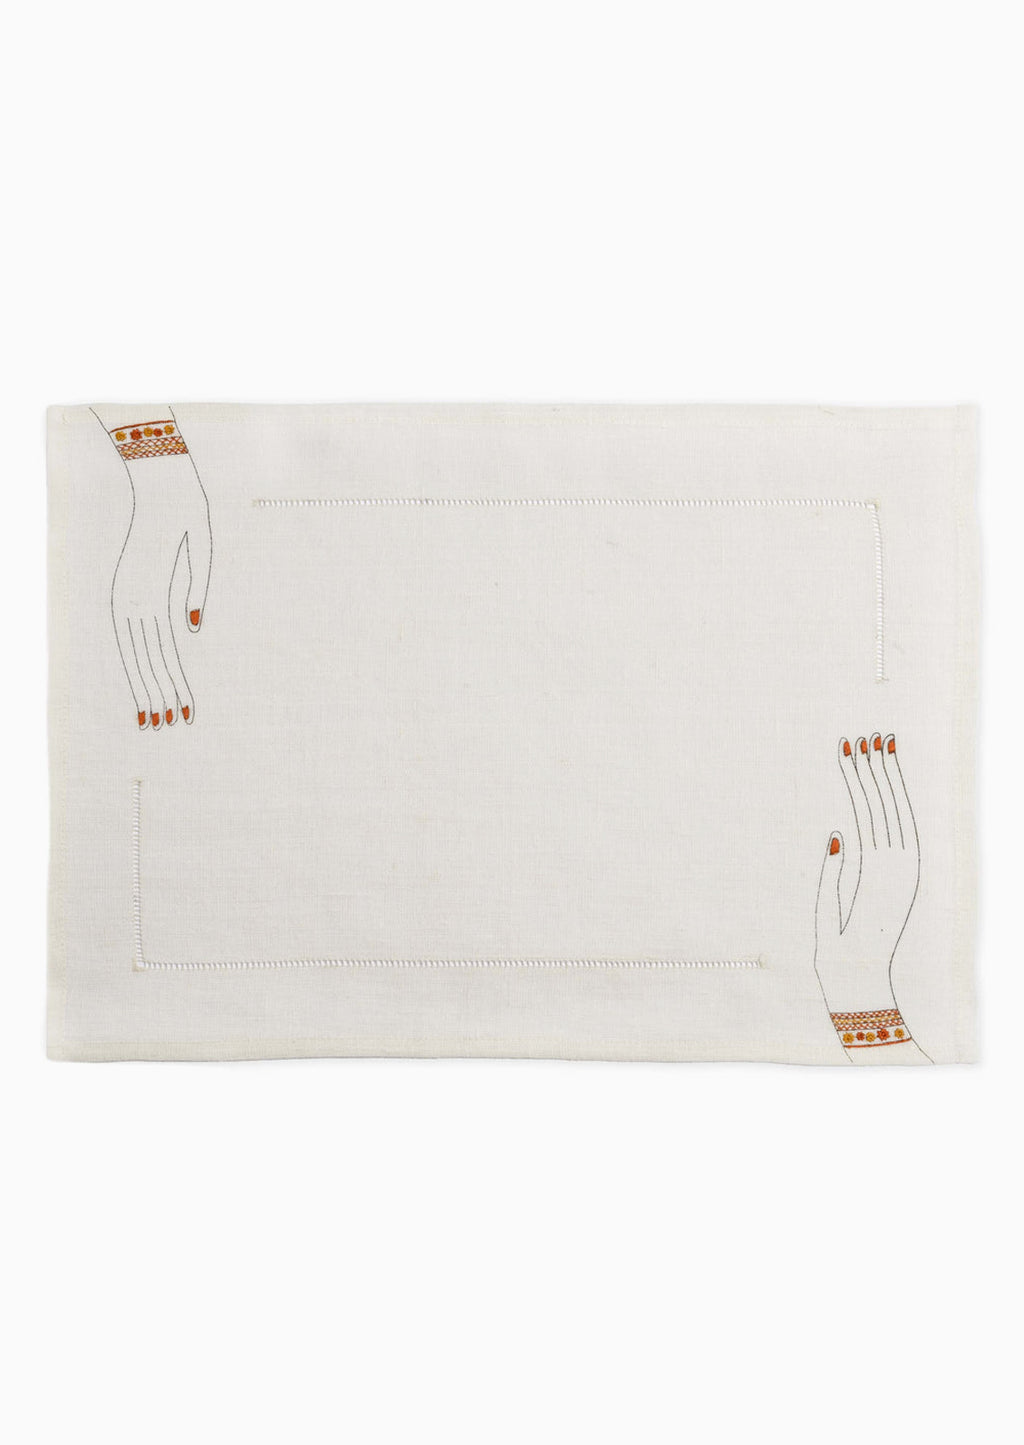 2: A white linen placemat with hemstitch border and embroidered hands at two corners.